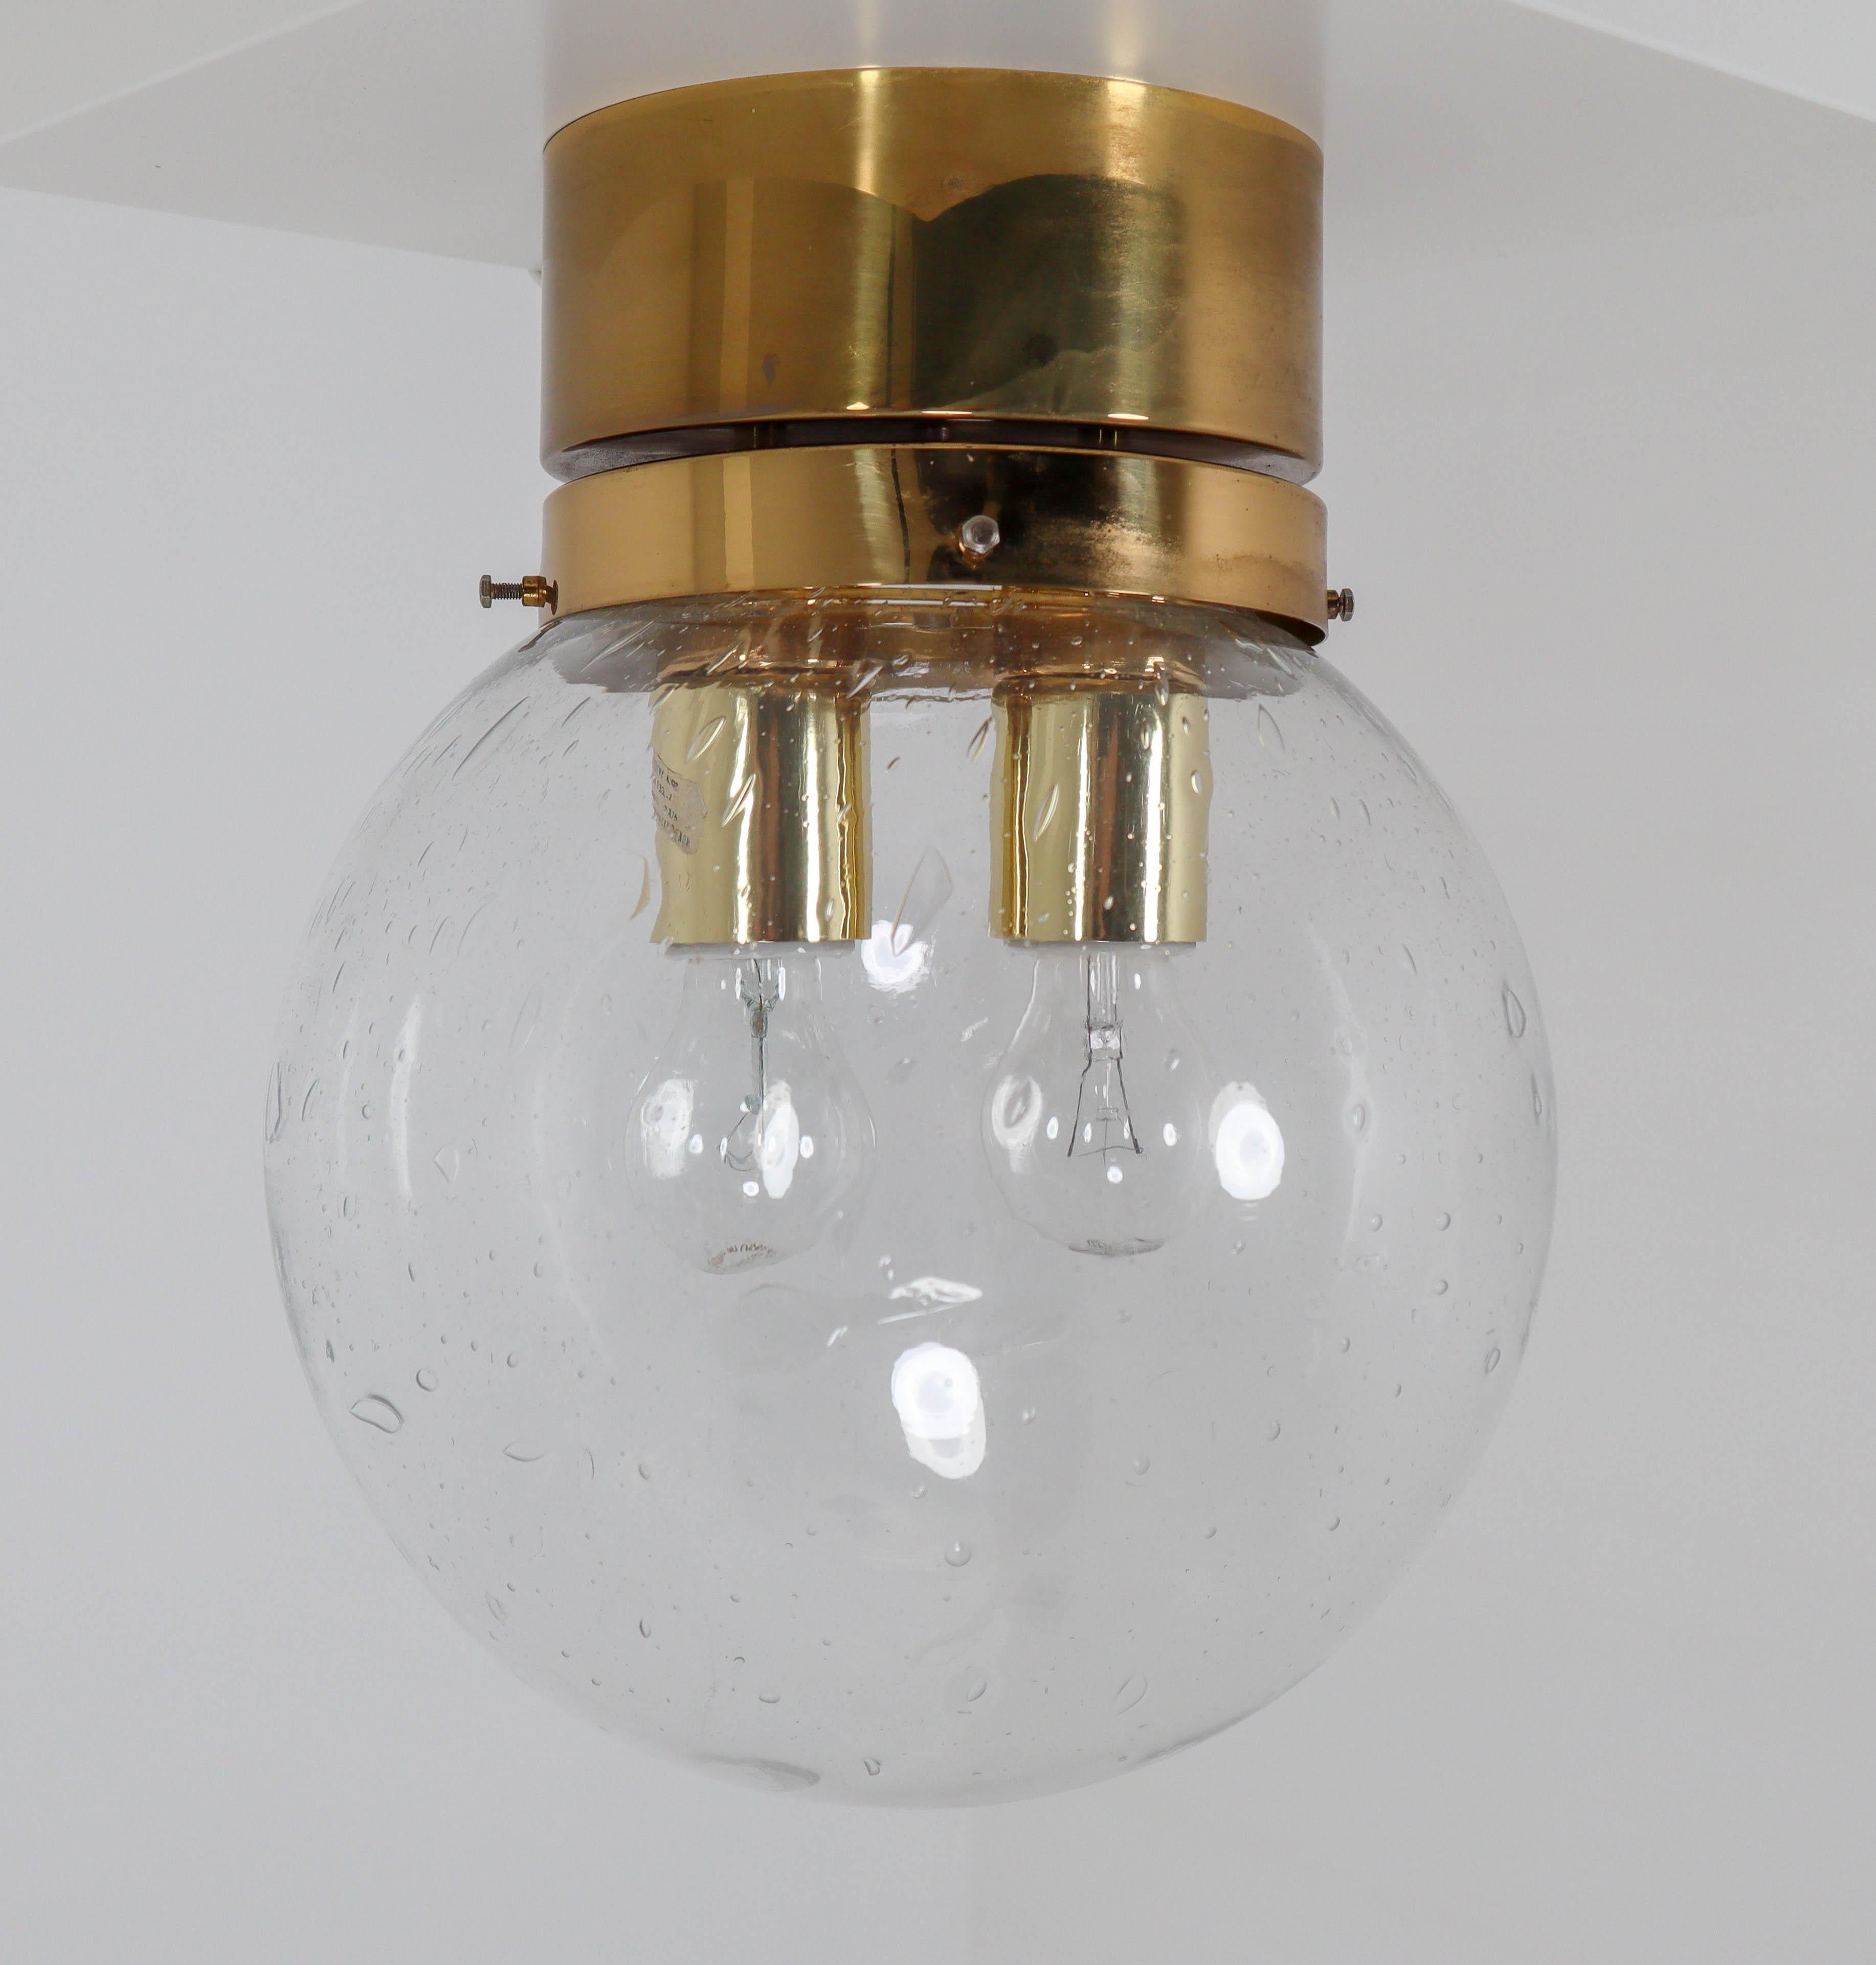 Midcentury hotel ceiling or floor lights with brass frame and large hand blown glass. The lights are beautifully thanks to the hand blown glass. The pleasant light it spreads is very atmospheric, these lights will contribute to a luxurious character